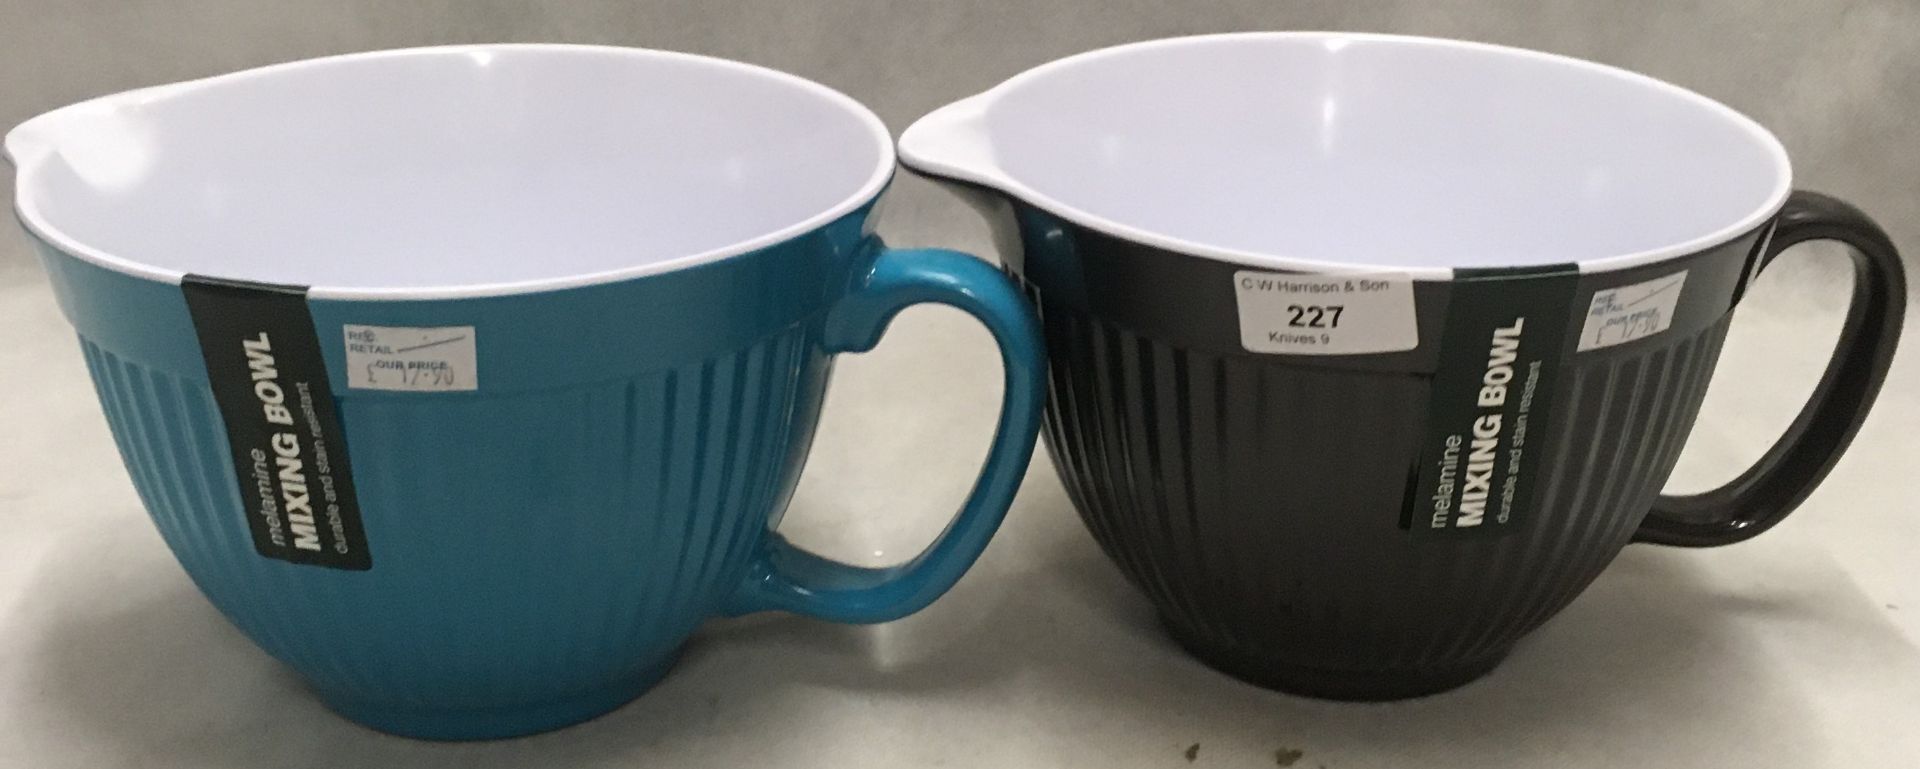 2 x Zeal melamine mixing bowls, blue and